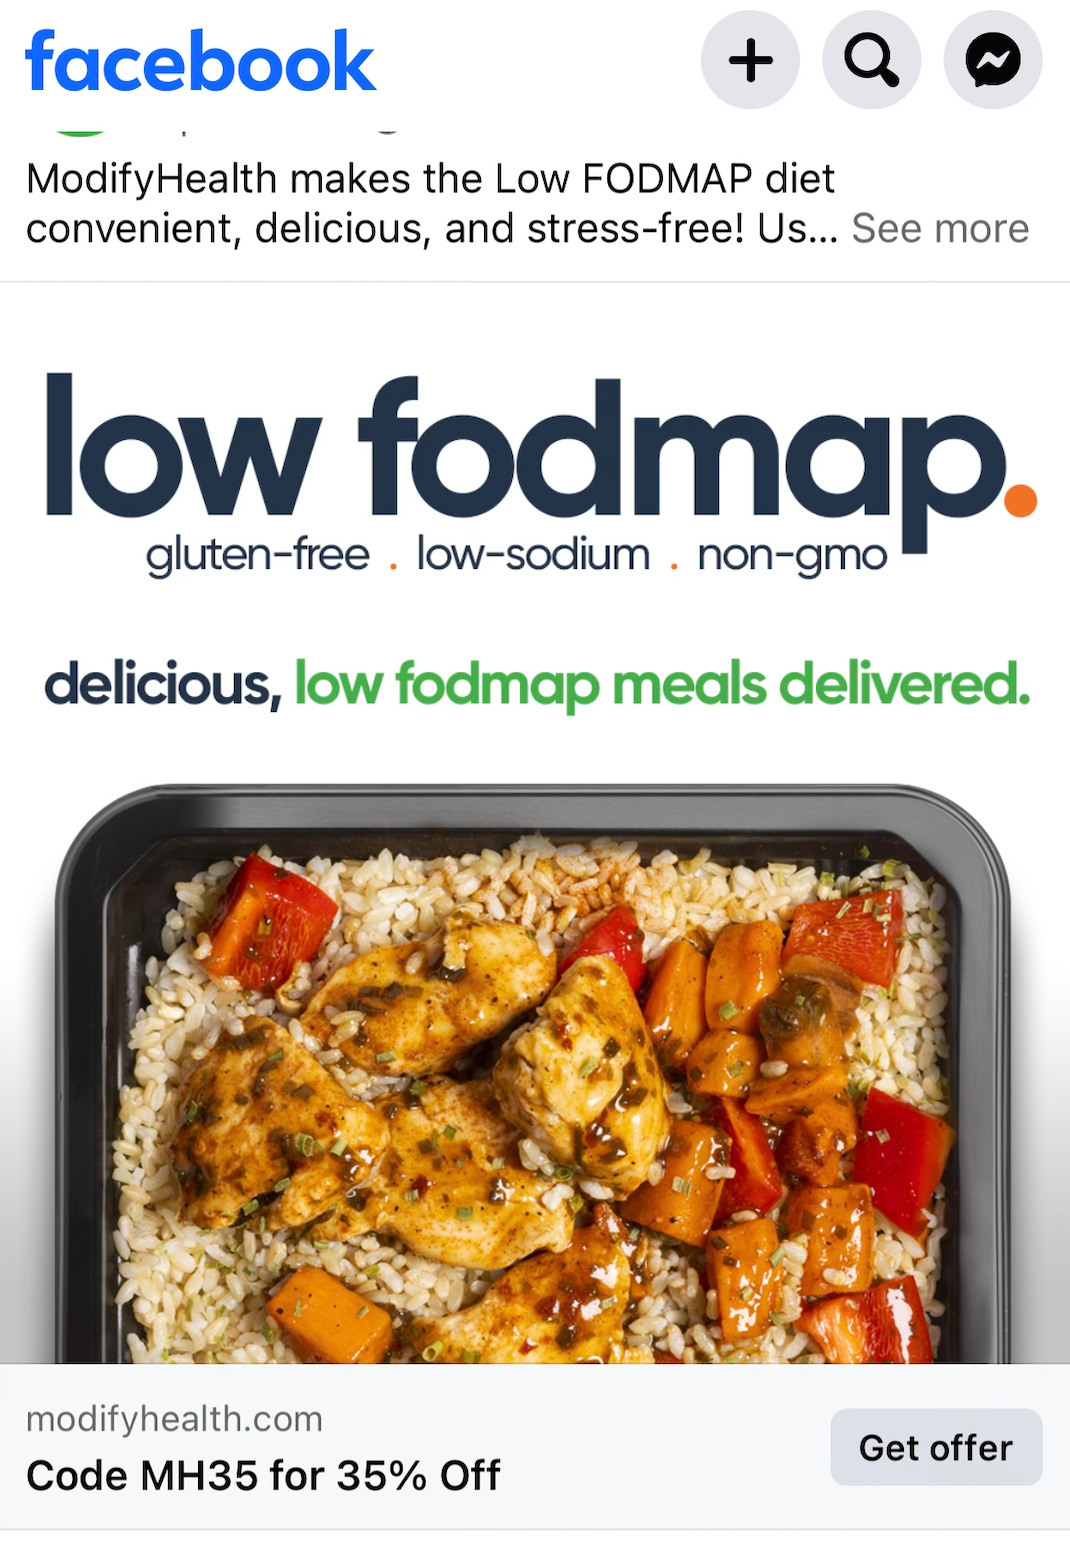 Facebook ad for "Low FODMAP" meal delivery